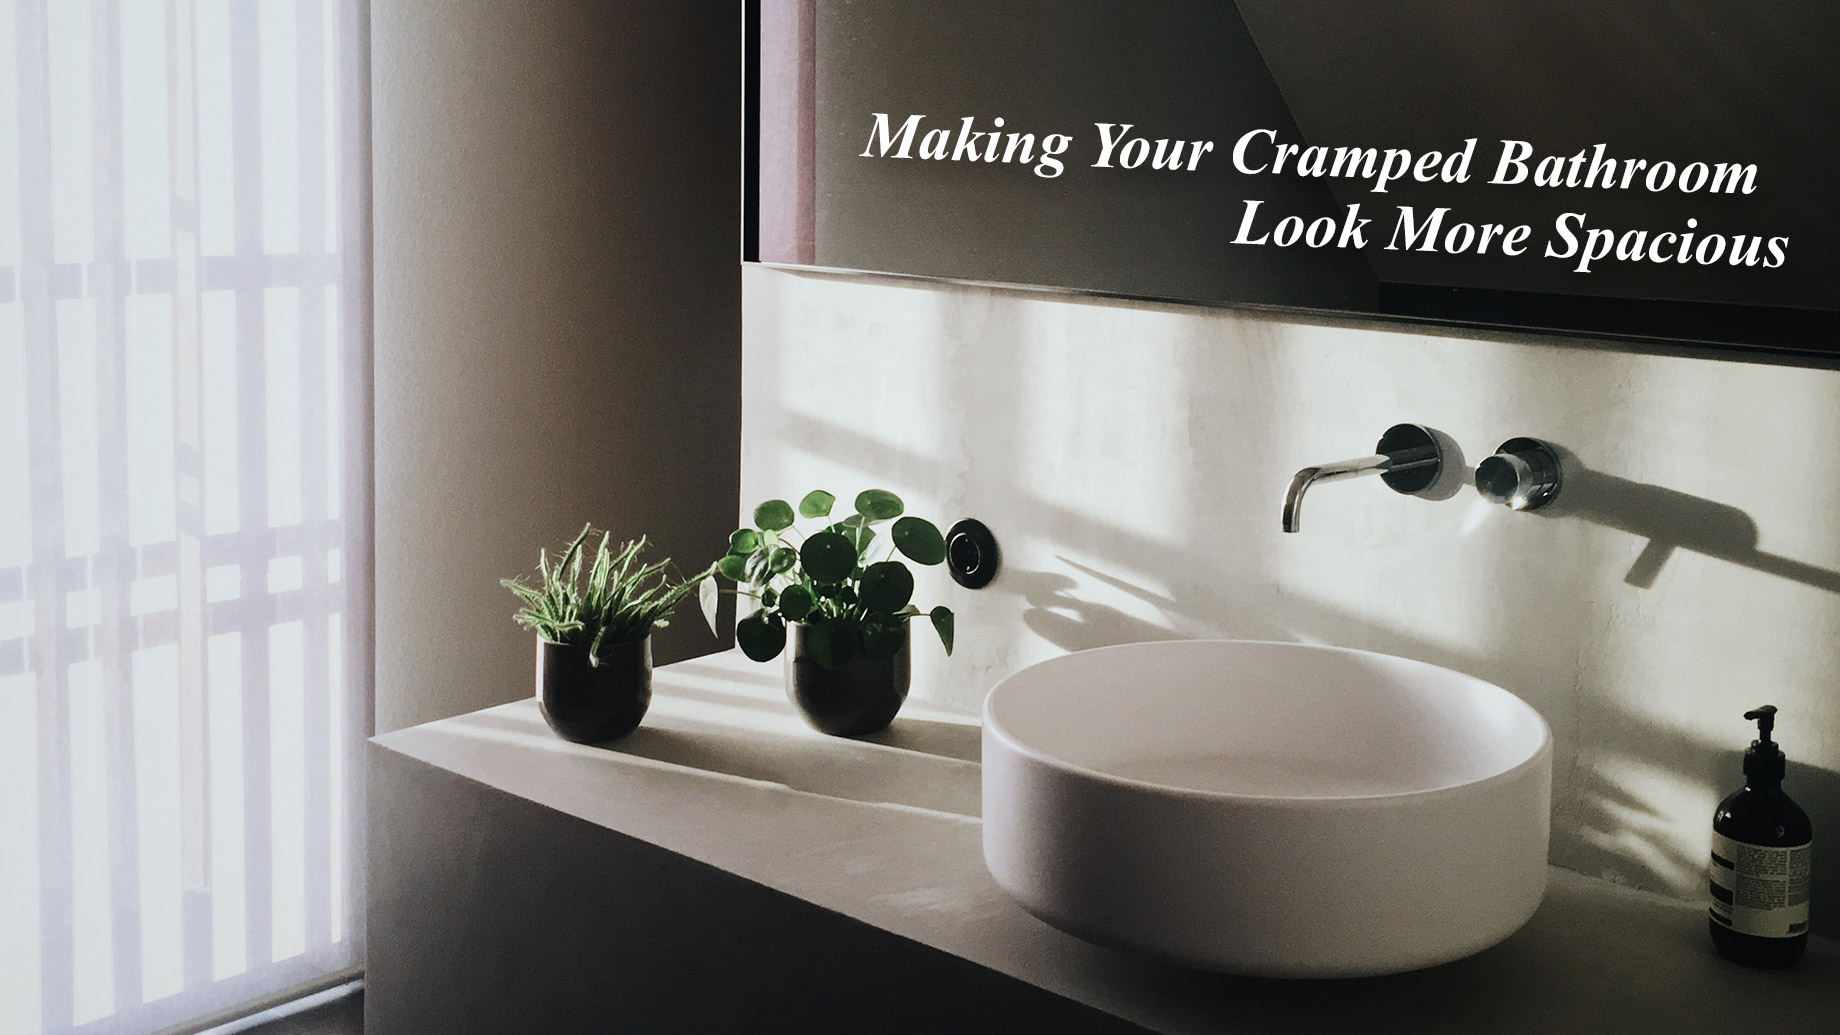 Making Your Cramped Bathroom Look More Spacious